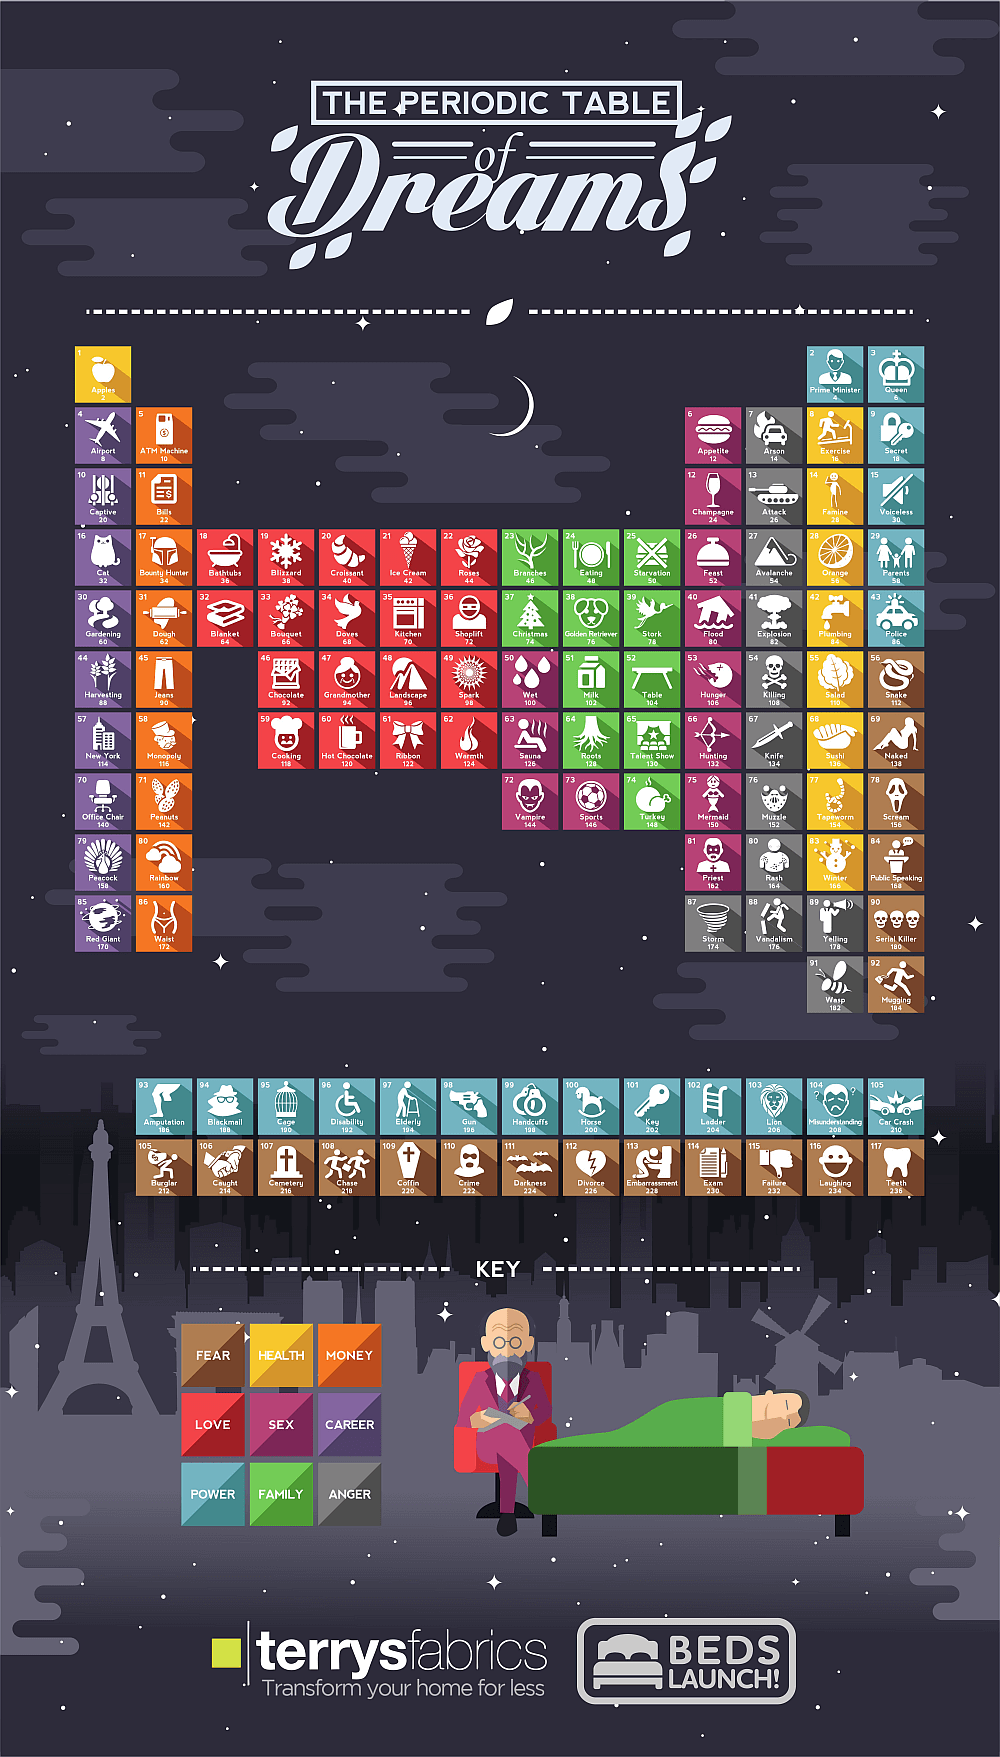 Periodic Table of Dreams Infographic